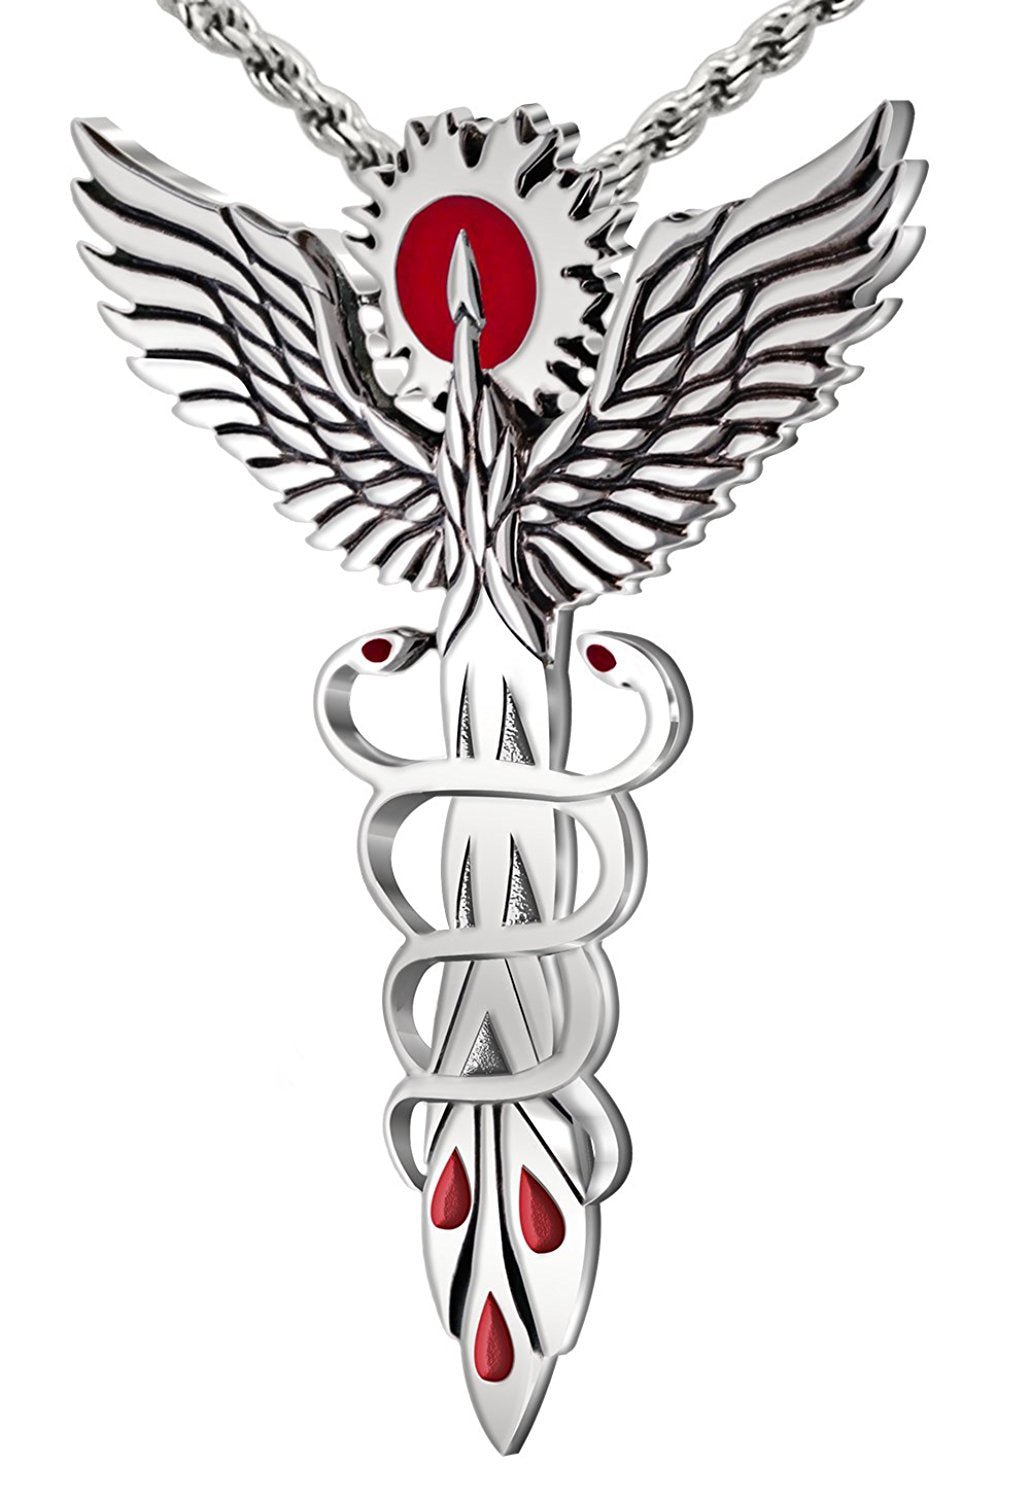 Antique 925 Sterling Silver Modern Day Twist Medical Caduceus Pendant Necklace, 47mm - US Jewels